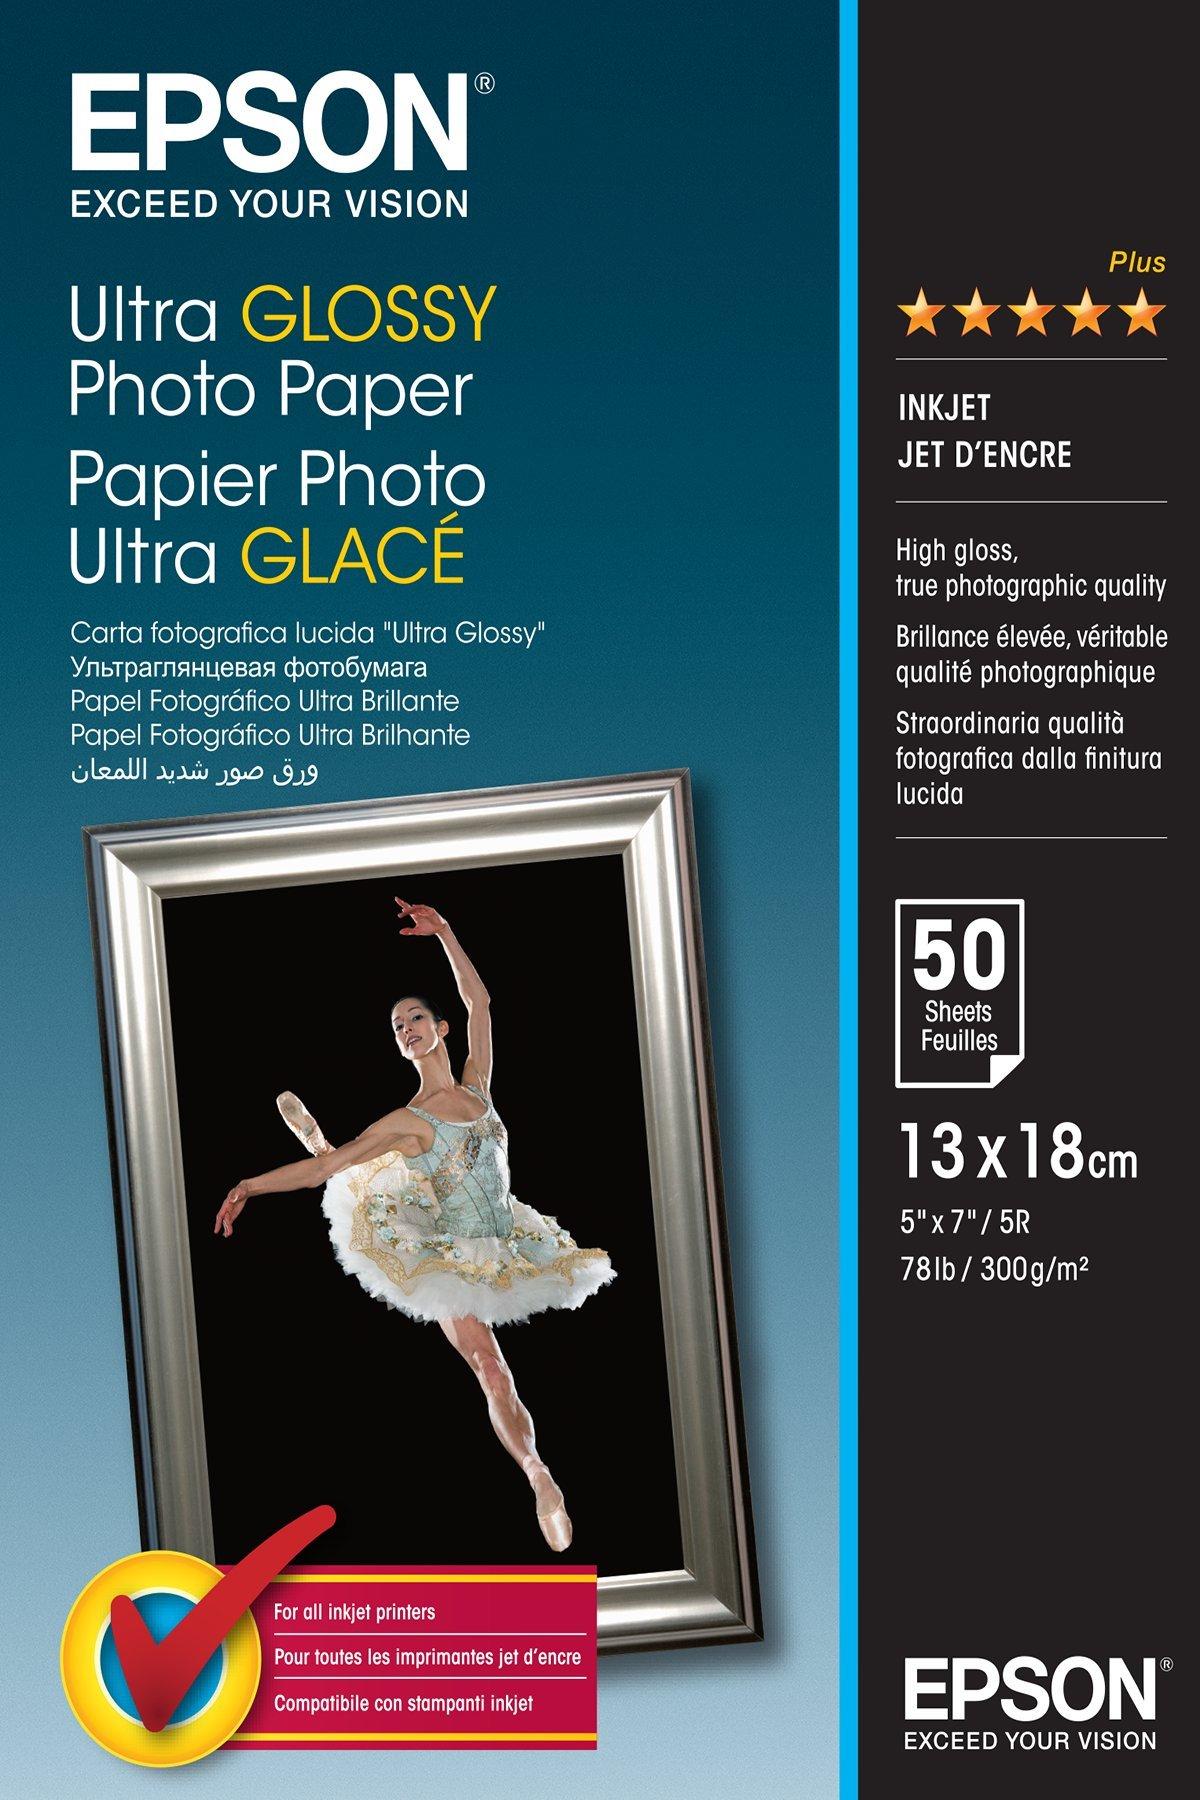 ultra-glossy-photo-paper-13x18cm-50-sheets-paper-and-media-ink